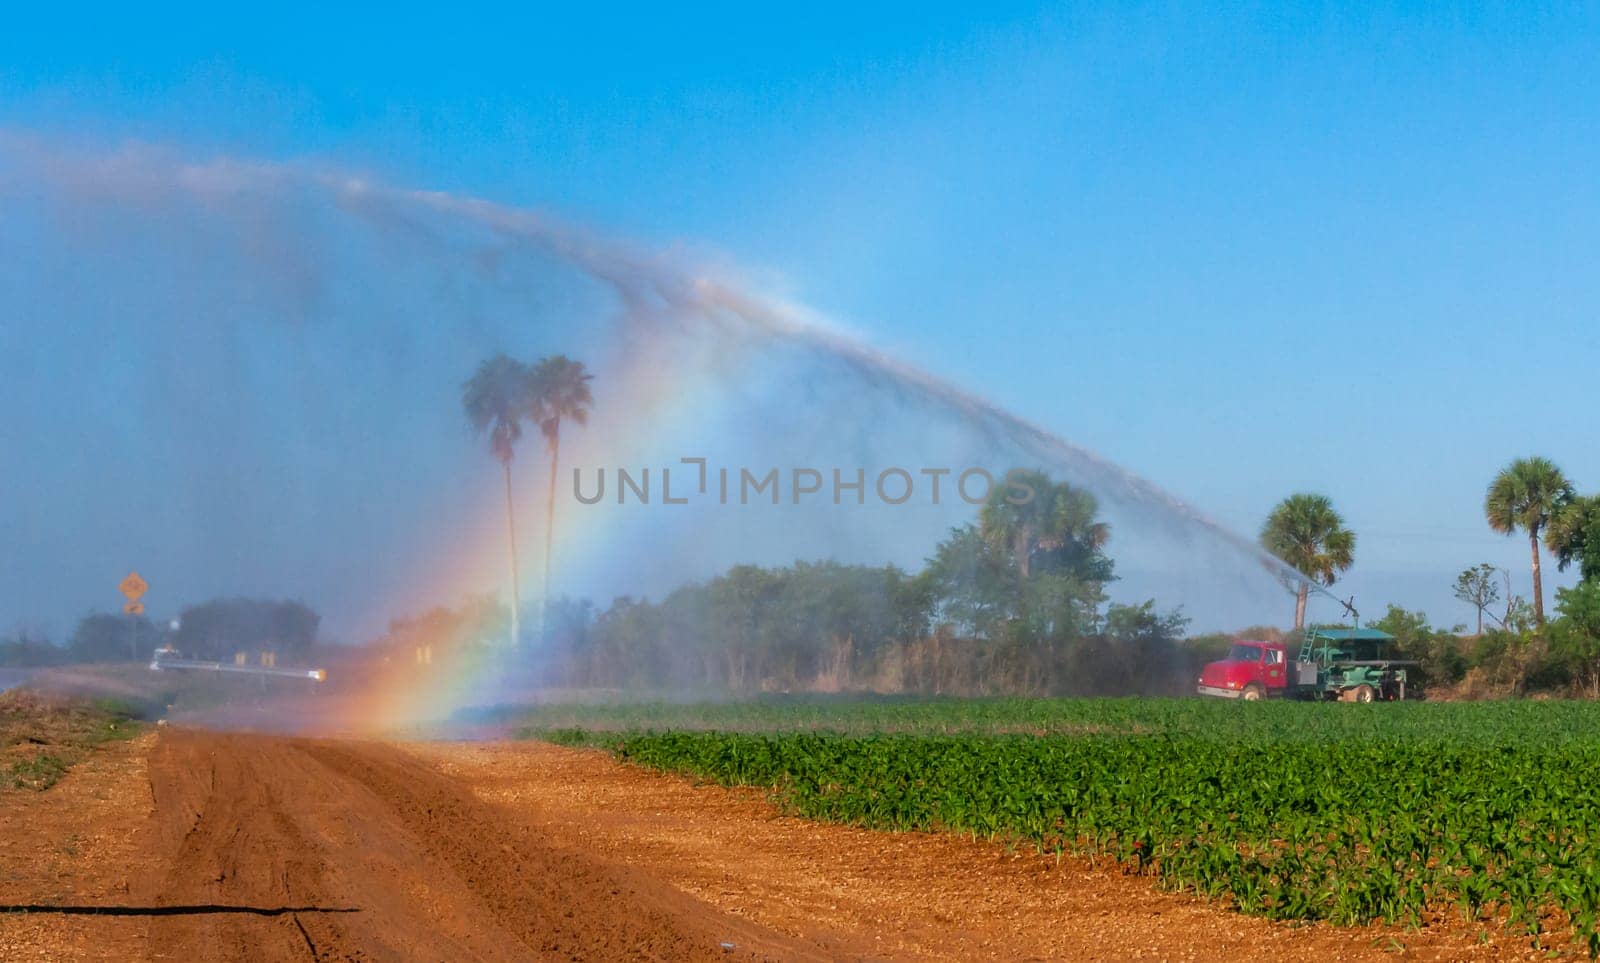 USA, FLORIDA - NOVEMBER 30, 2011: a rainbow in the sky from a fire engine spraying a field, Florida